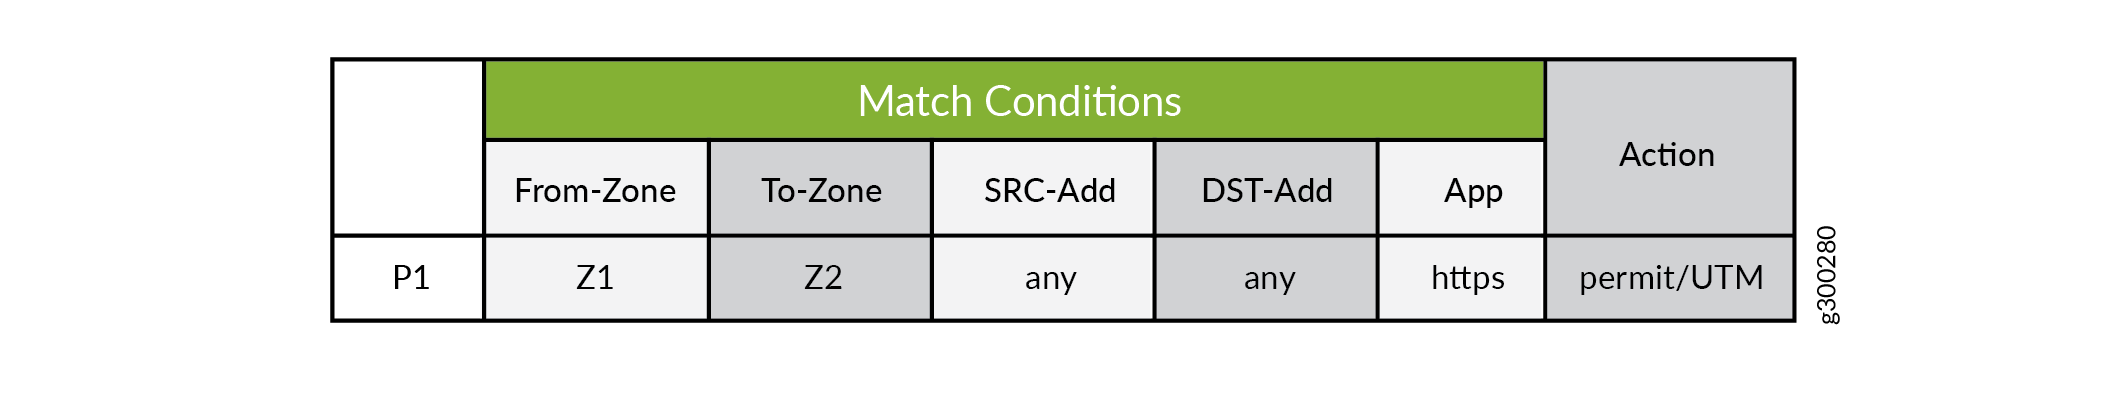 Match Conditions